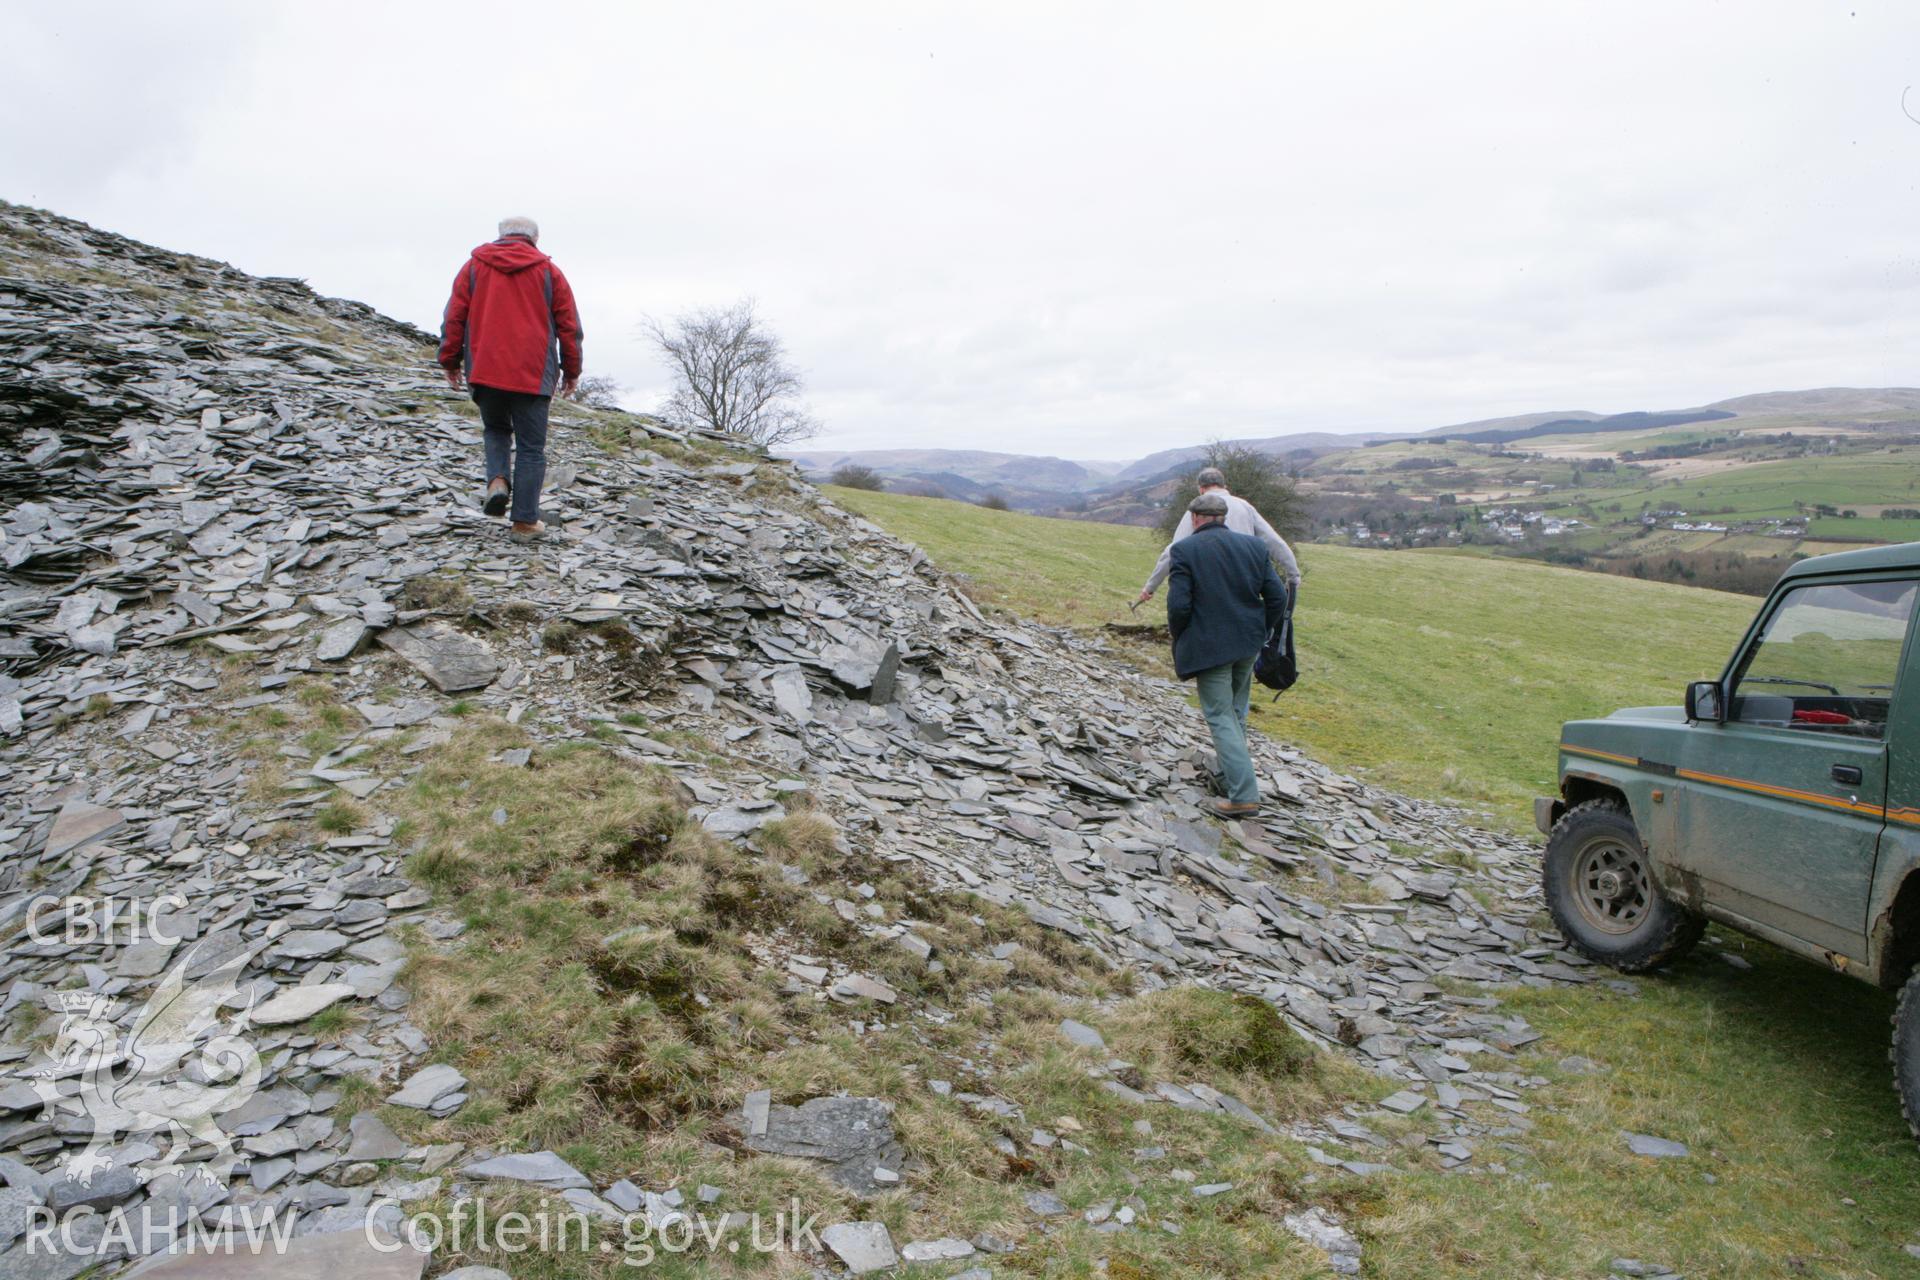 Historic quarry of shale slates at Geufron, Nant Bir, outcrops of which are thought to have provided at least some of the roofing slates for Abermagwr Roman villa. Field visit with Dr Jeffrey Davies, Dr Toby Driver & Chris Fletcher (geologist), 20/3/2012.